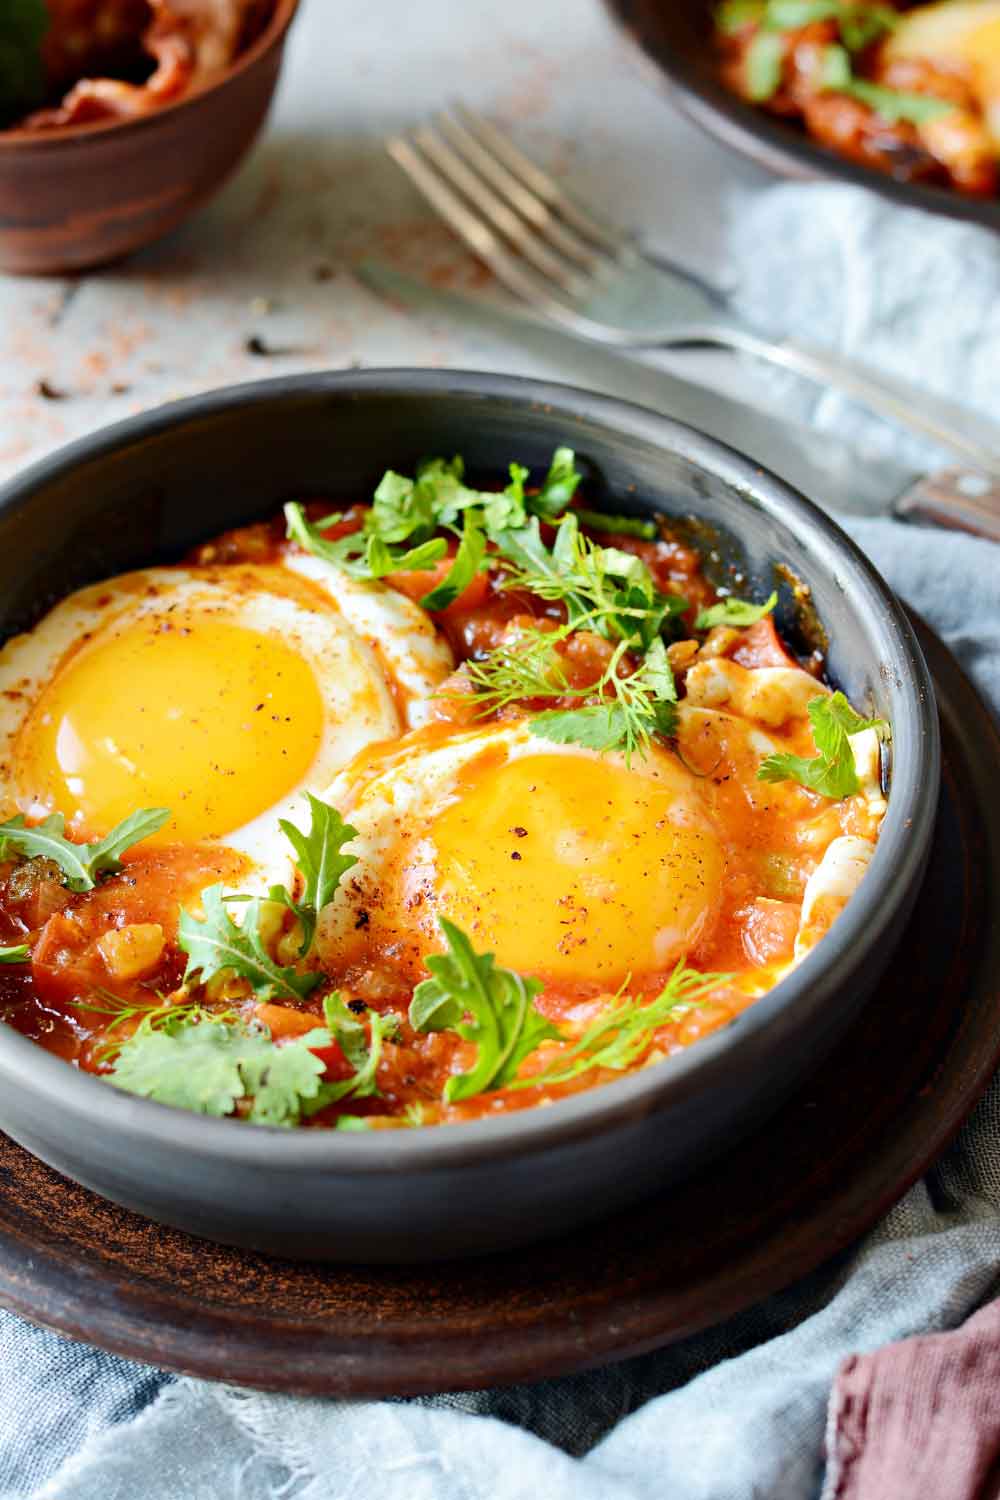 Shakshuka (Eggs Poached in Spicy Tomato Sauce)